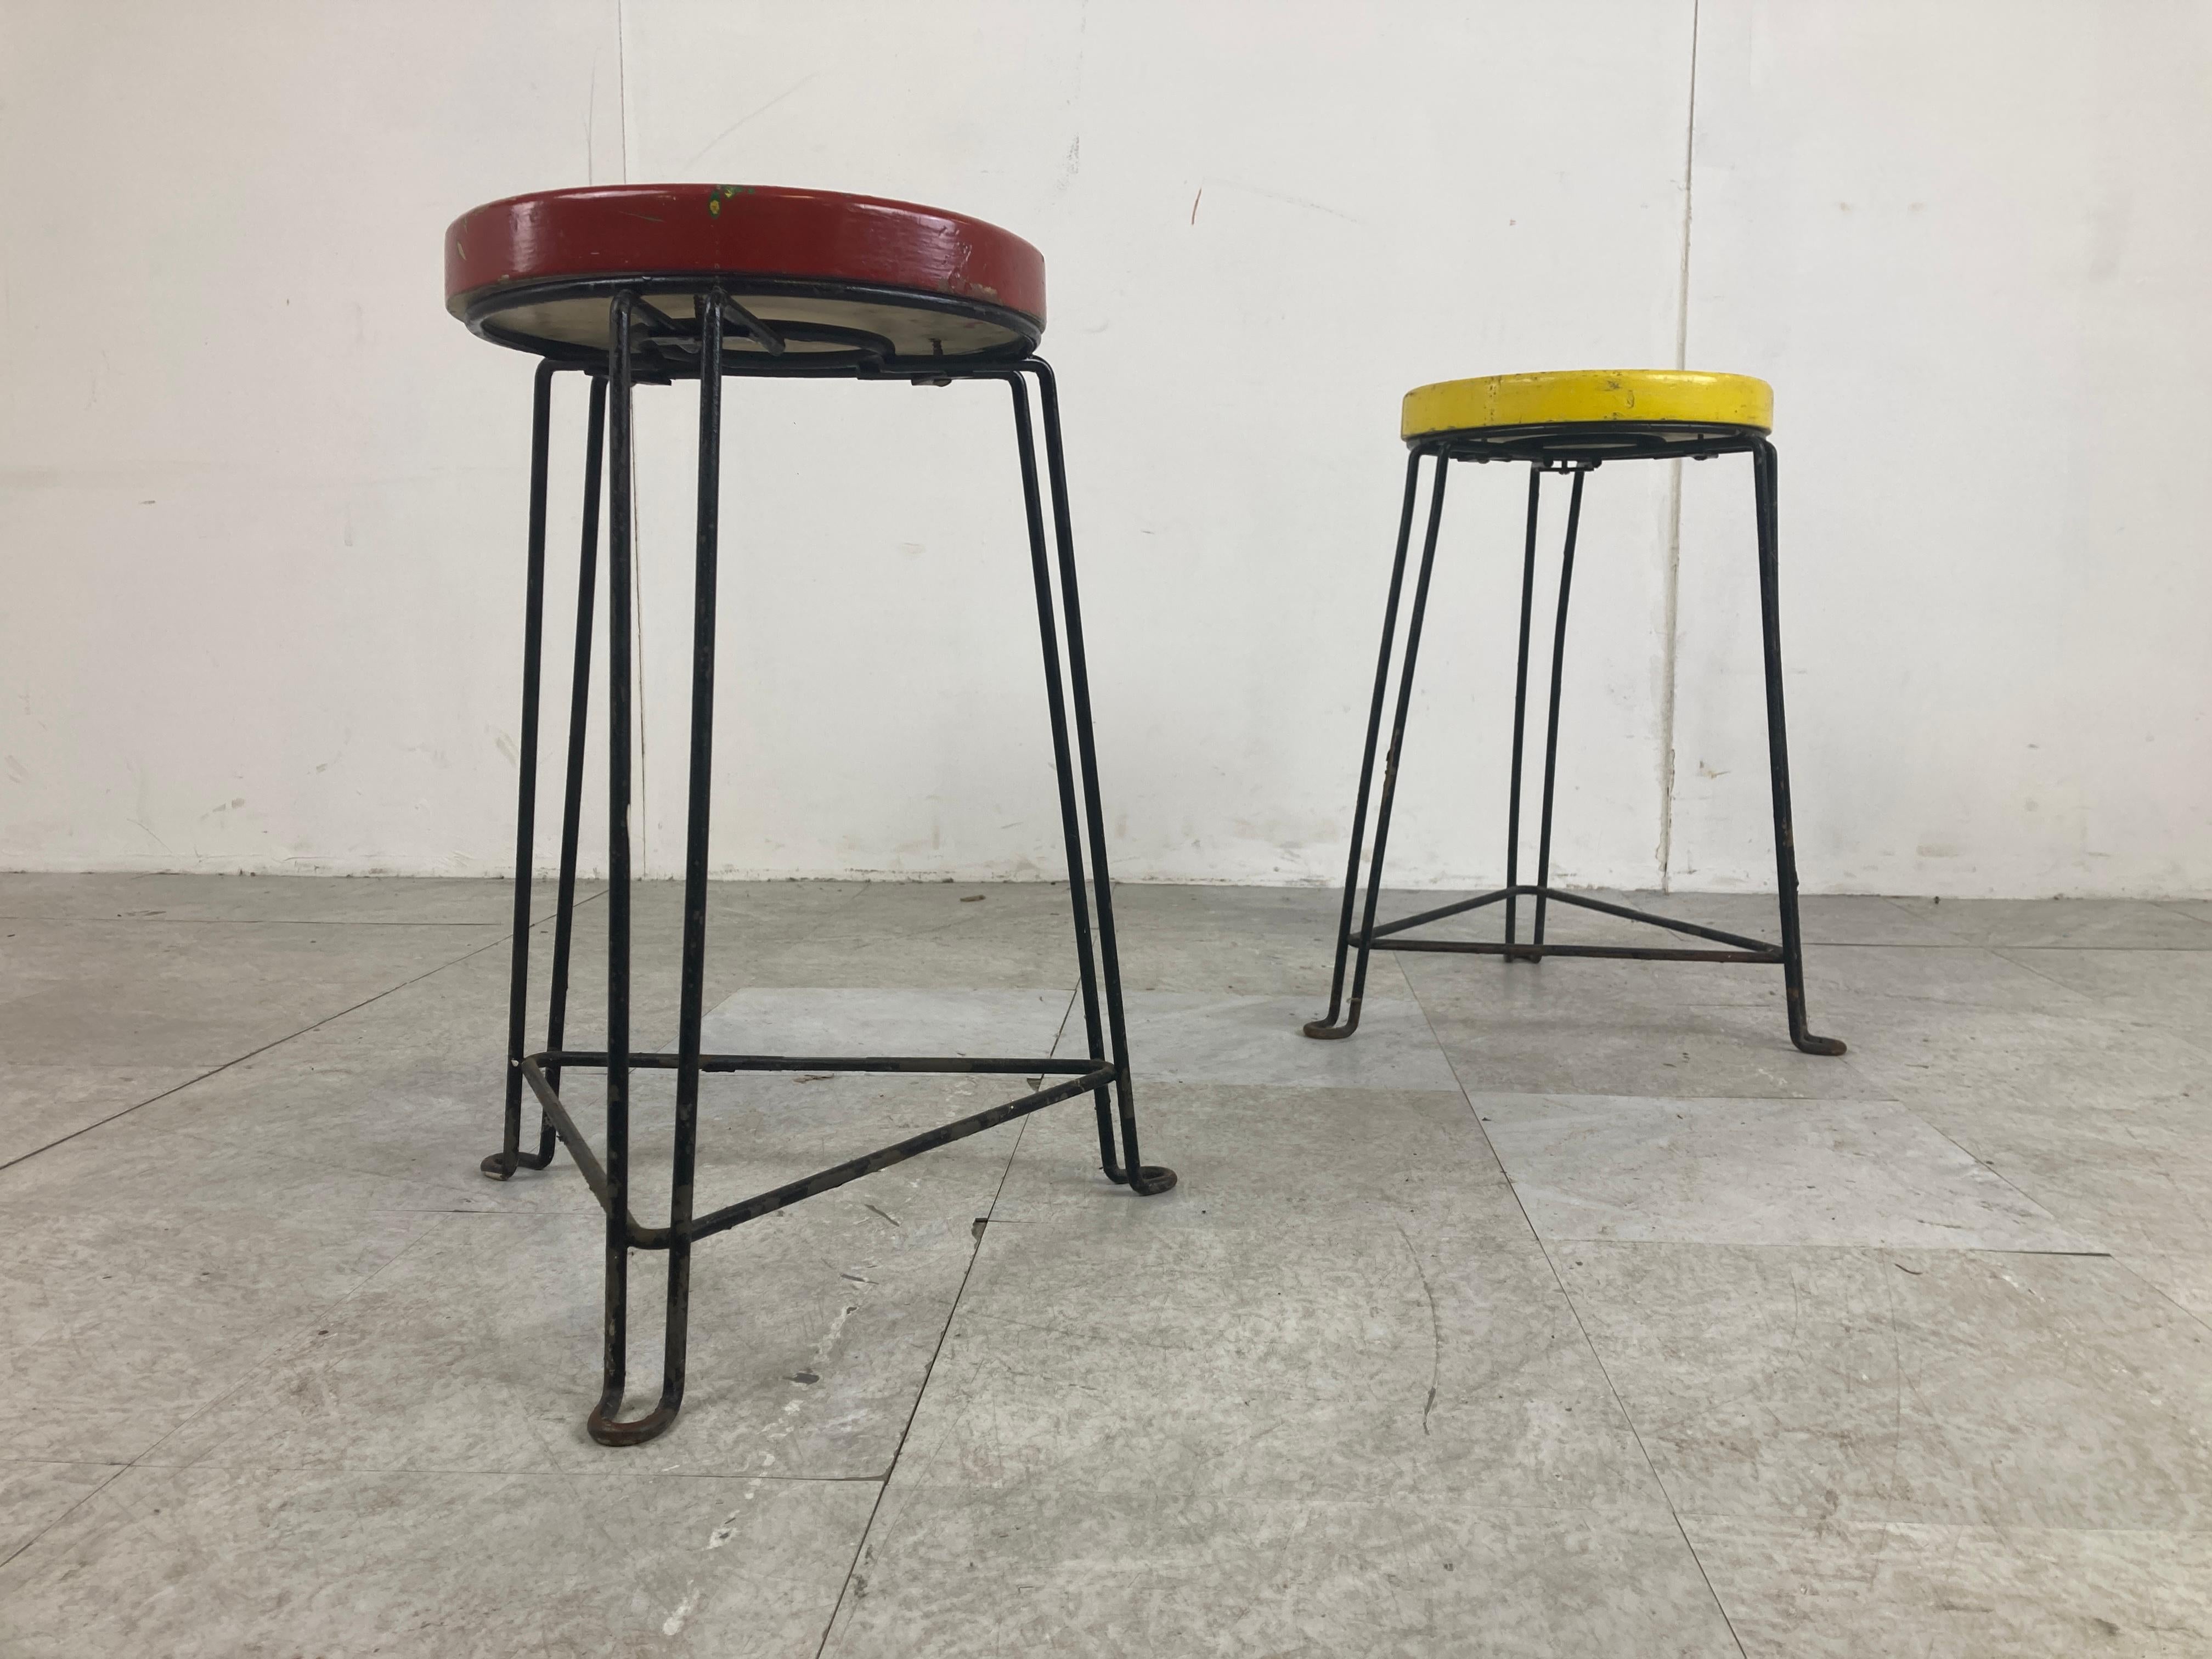 Midcentury industrial stools with a red and yellow wooden seat and a black metal base.

Very much in the style of Belgian designed Willy Vandermeeren.

Nicely worn, which makes them very attractive.

1950s Belgium.

Measures: Height: